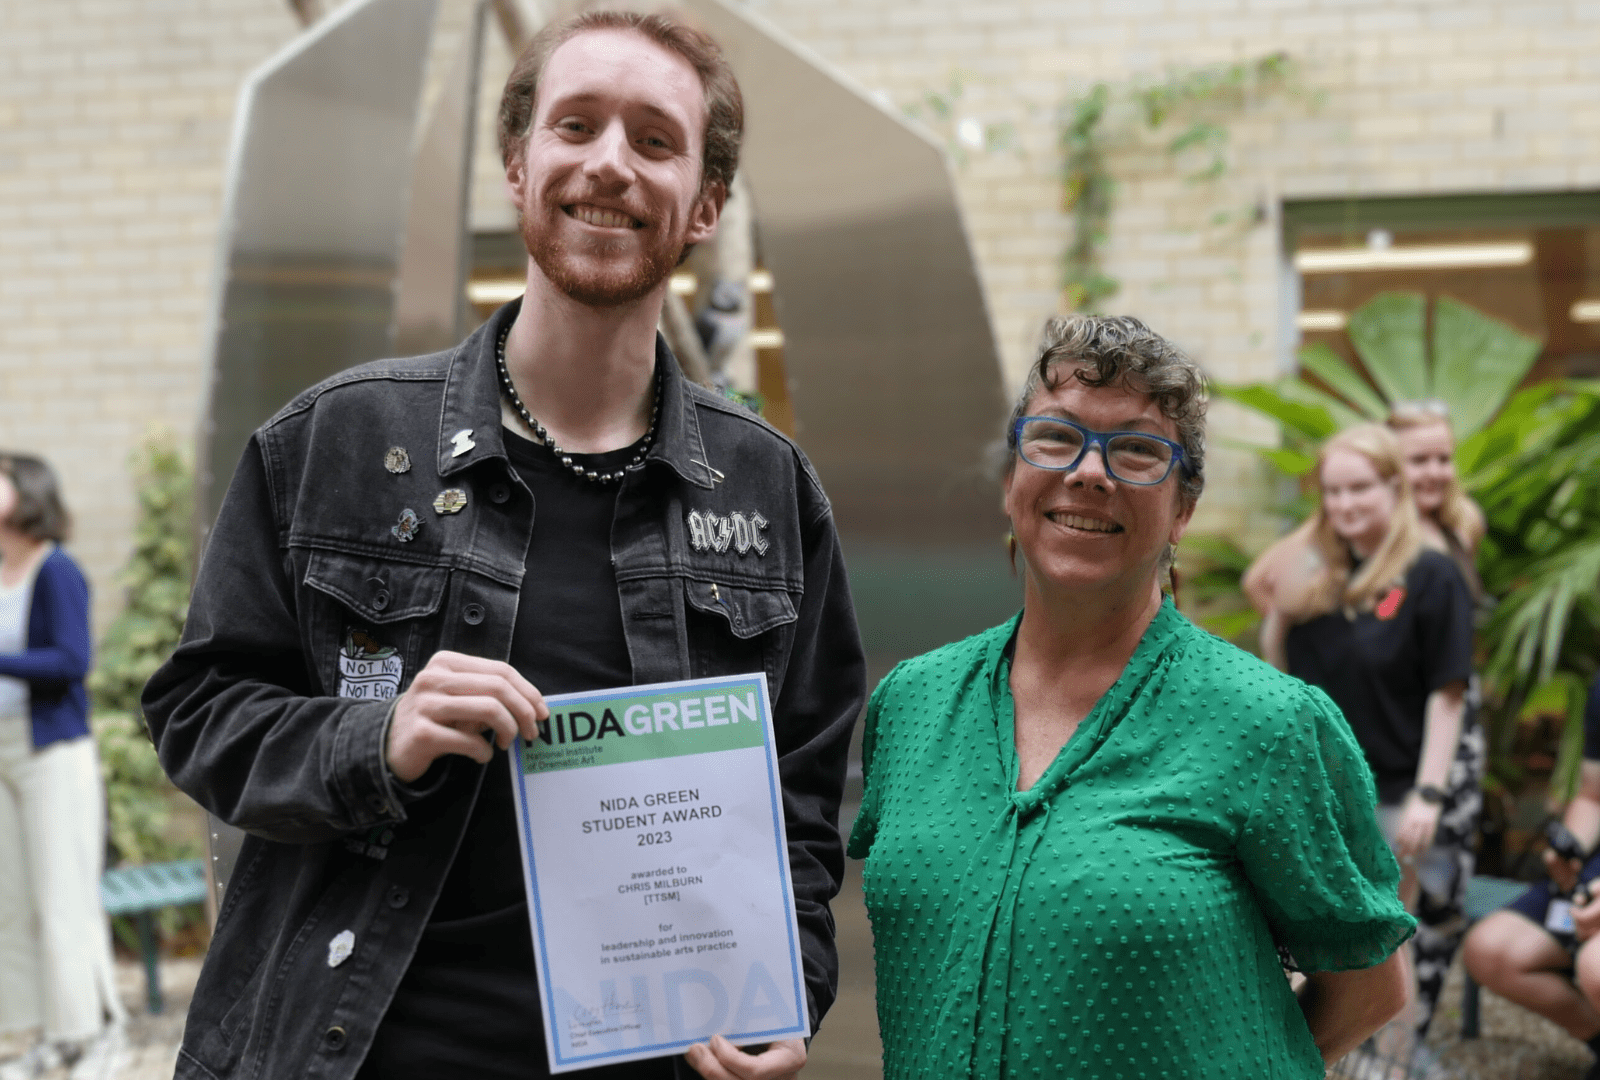 NIDA Sustainability Manager Imogen Ross awarded the 2023 NIDA Green Student Award to Chris Milburn (Technical Theatre and Stage Management, 2023)